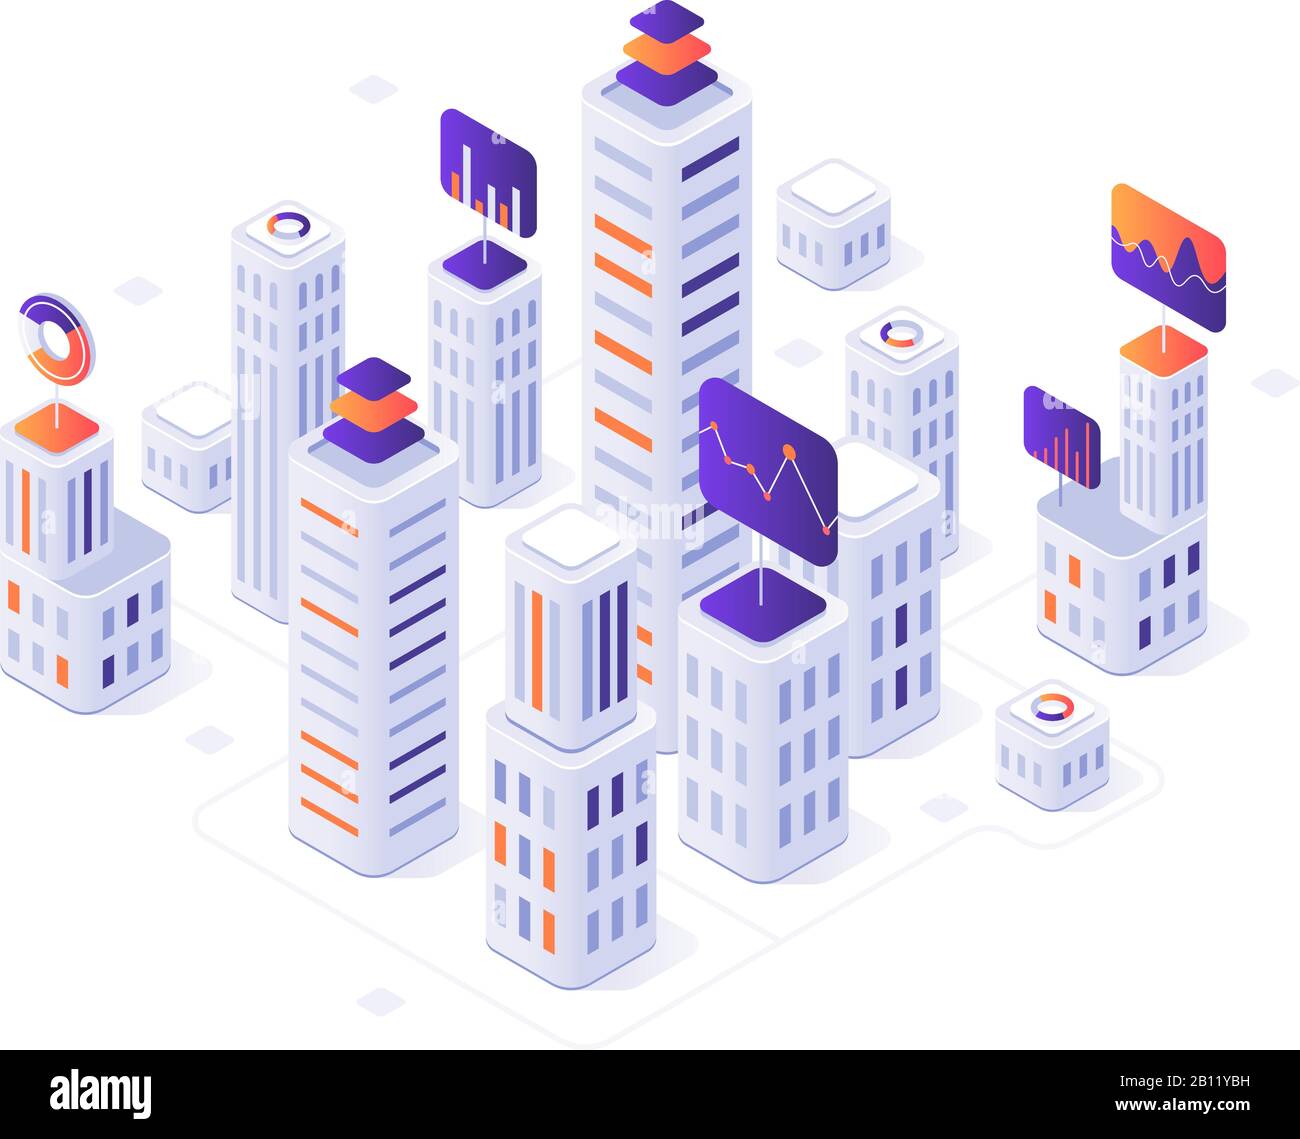 Isometric megalopolis infographic. City buildings, futuristic urban and town business office district metrics 3d vector illustration Stock Vector